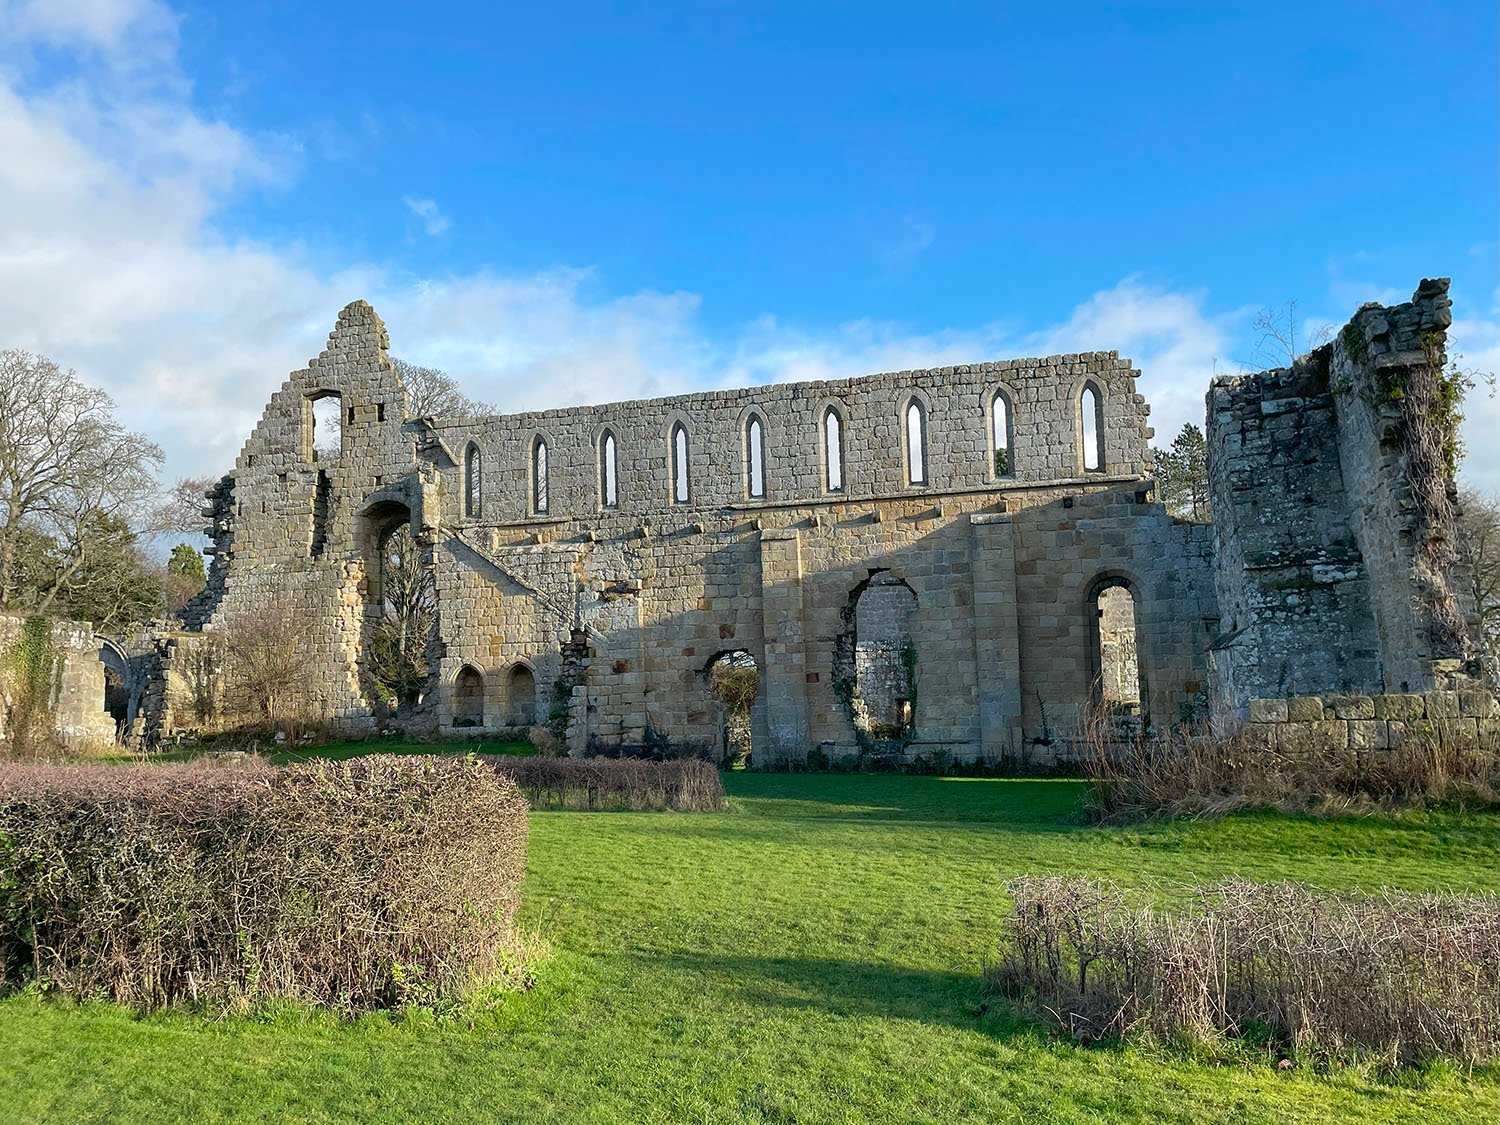 Image name jervaulx abbey in the sunshine yorkshire the 22 image from the post The historical secrets of Jervaulx Abbey with Dr Emma Wells in Yorkshire.com.